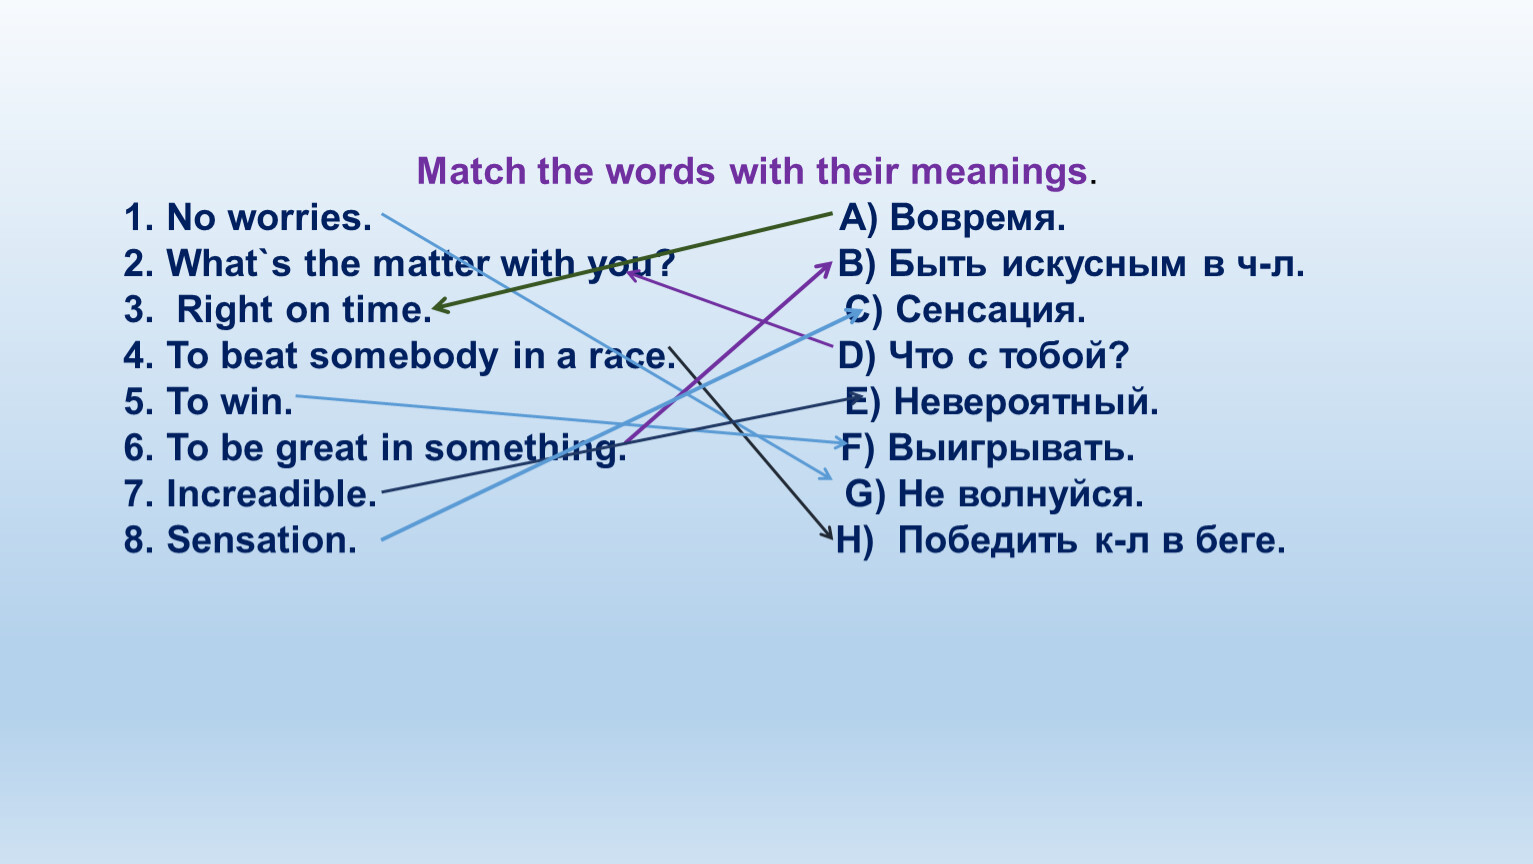 Match the words to their meanings below. Match the Words with their meanings..